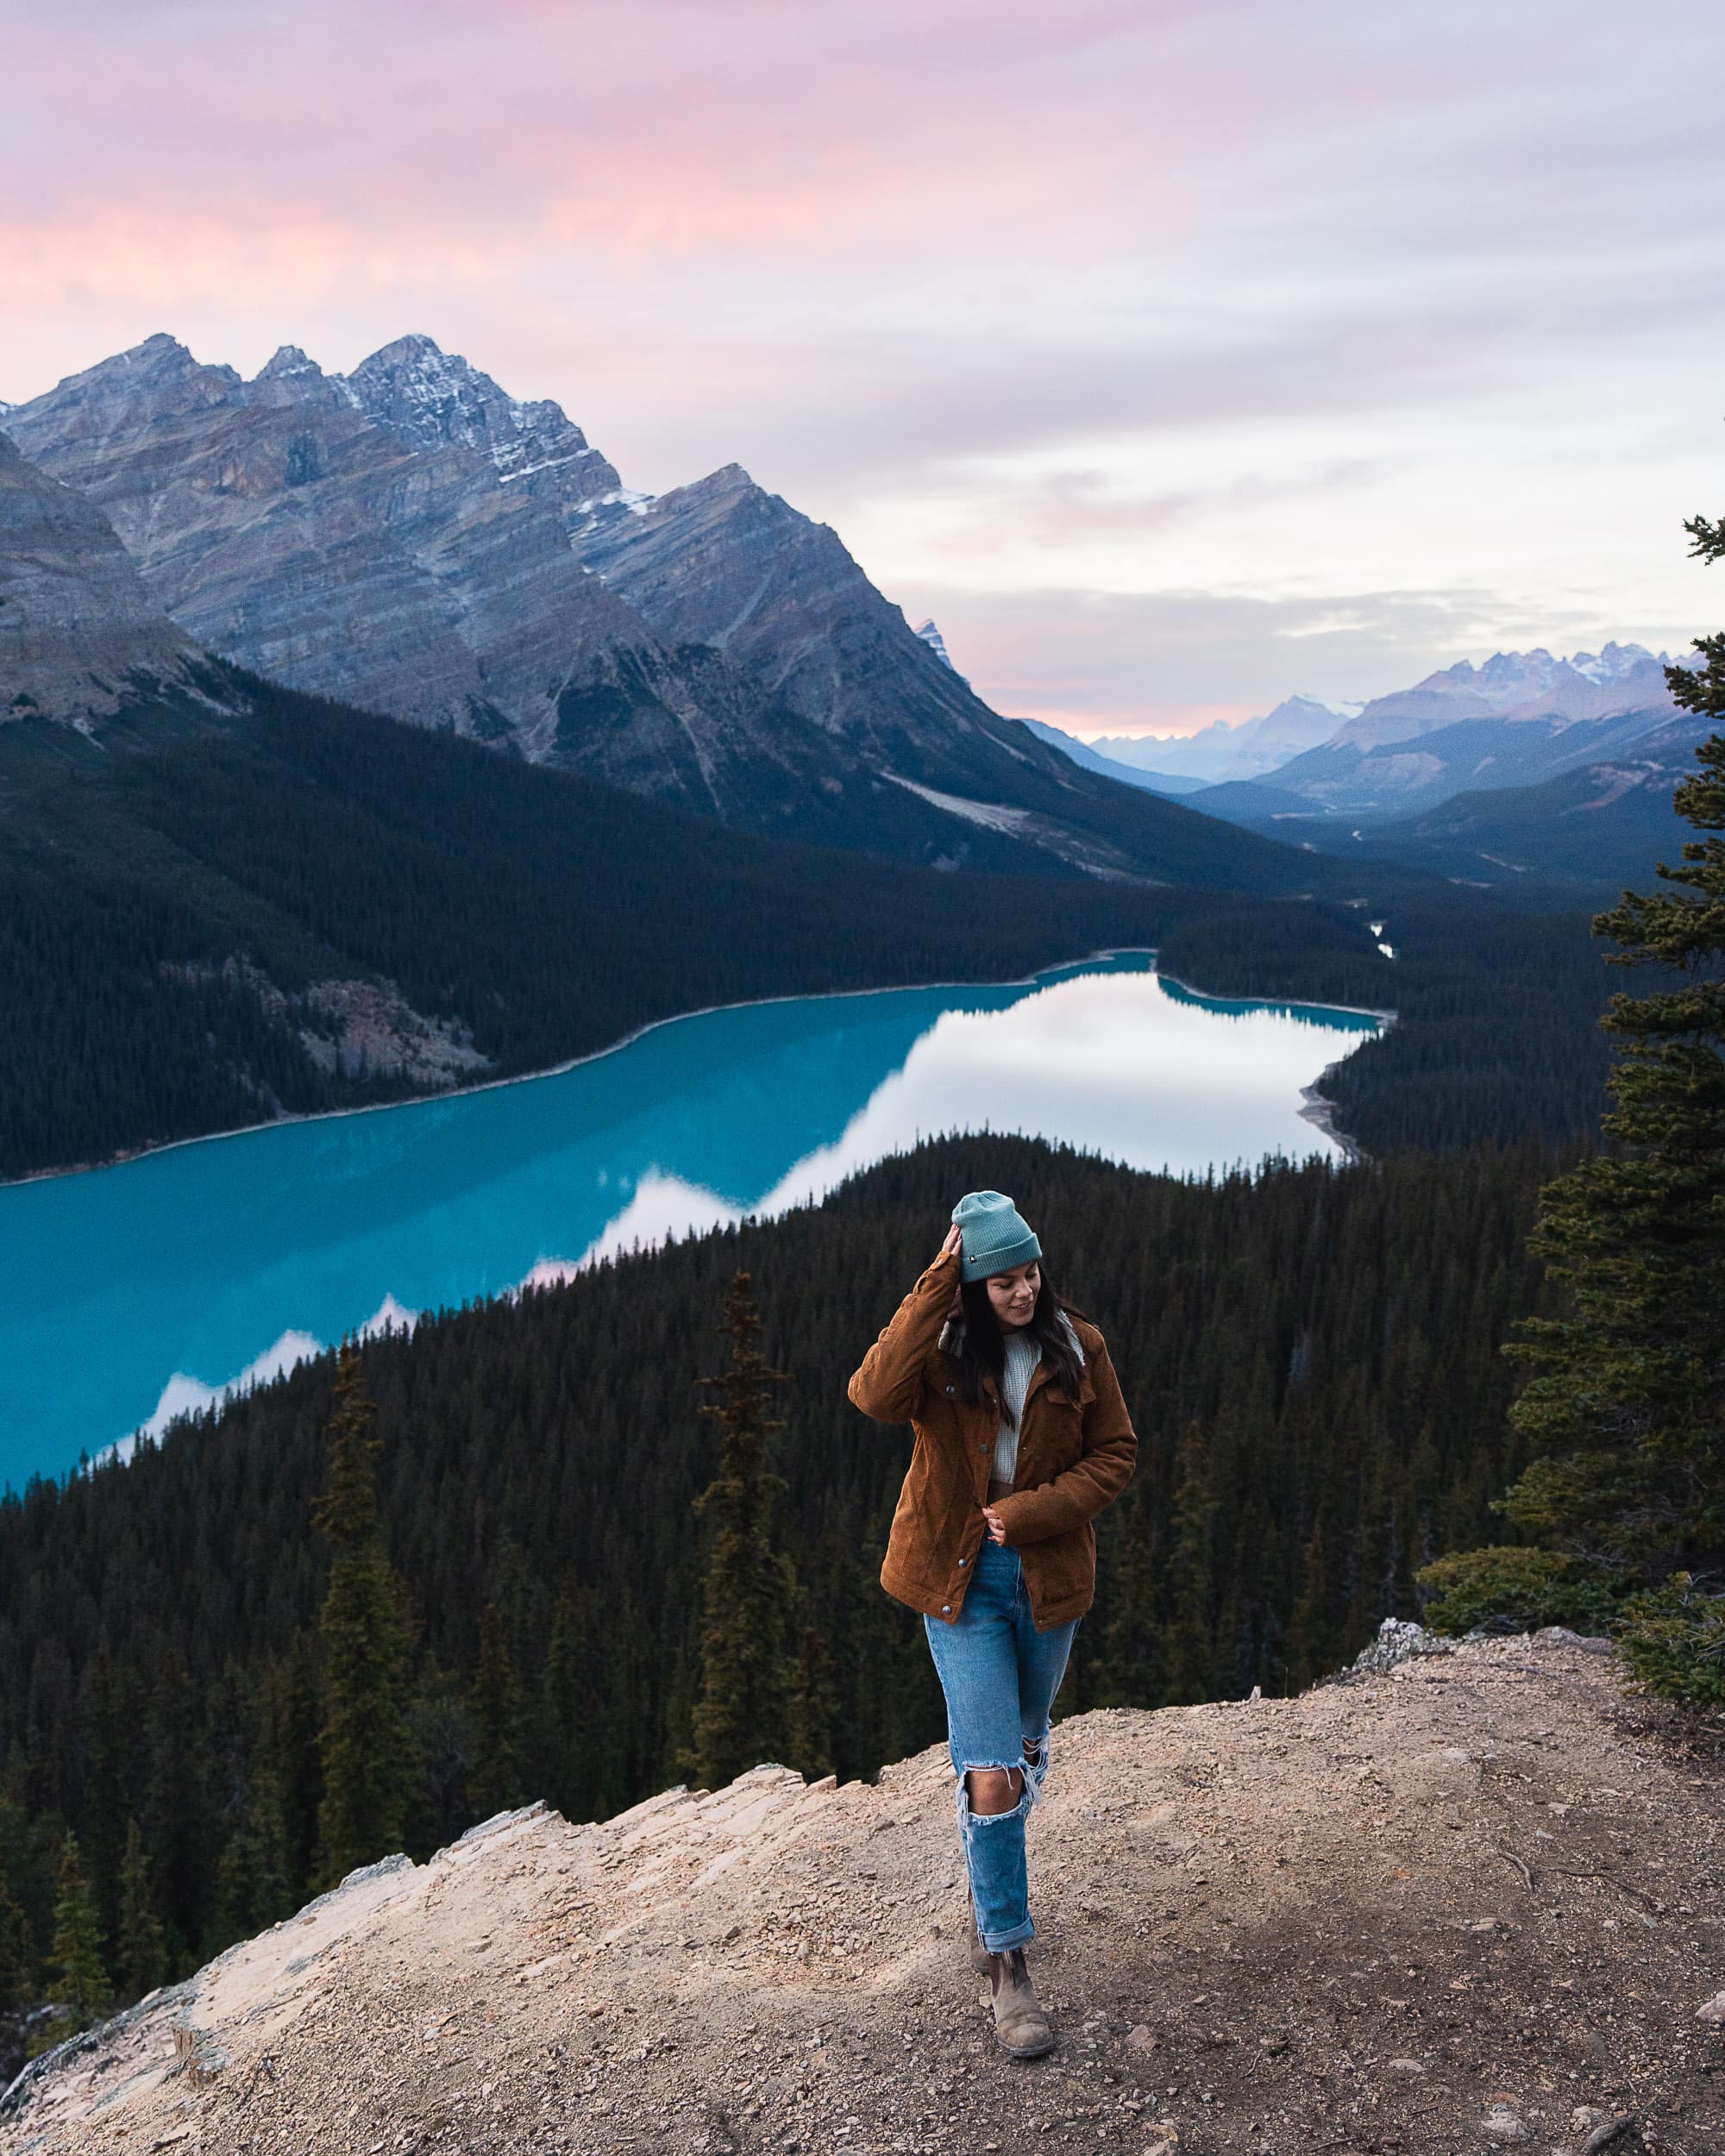 peyto lake is one of the best hikes in the canadian rockies - peyto lake at blue hour